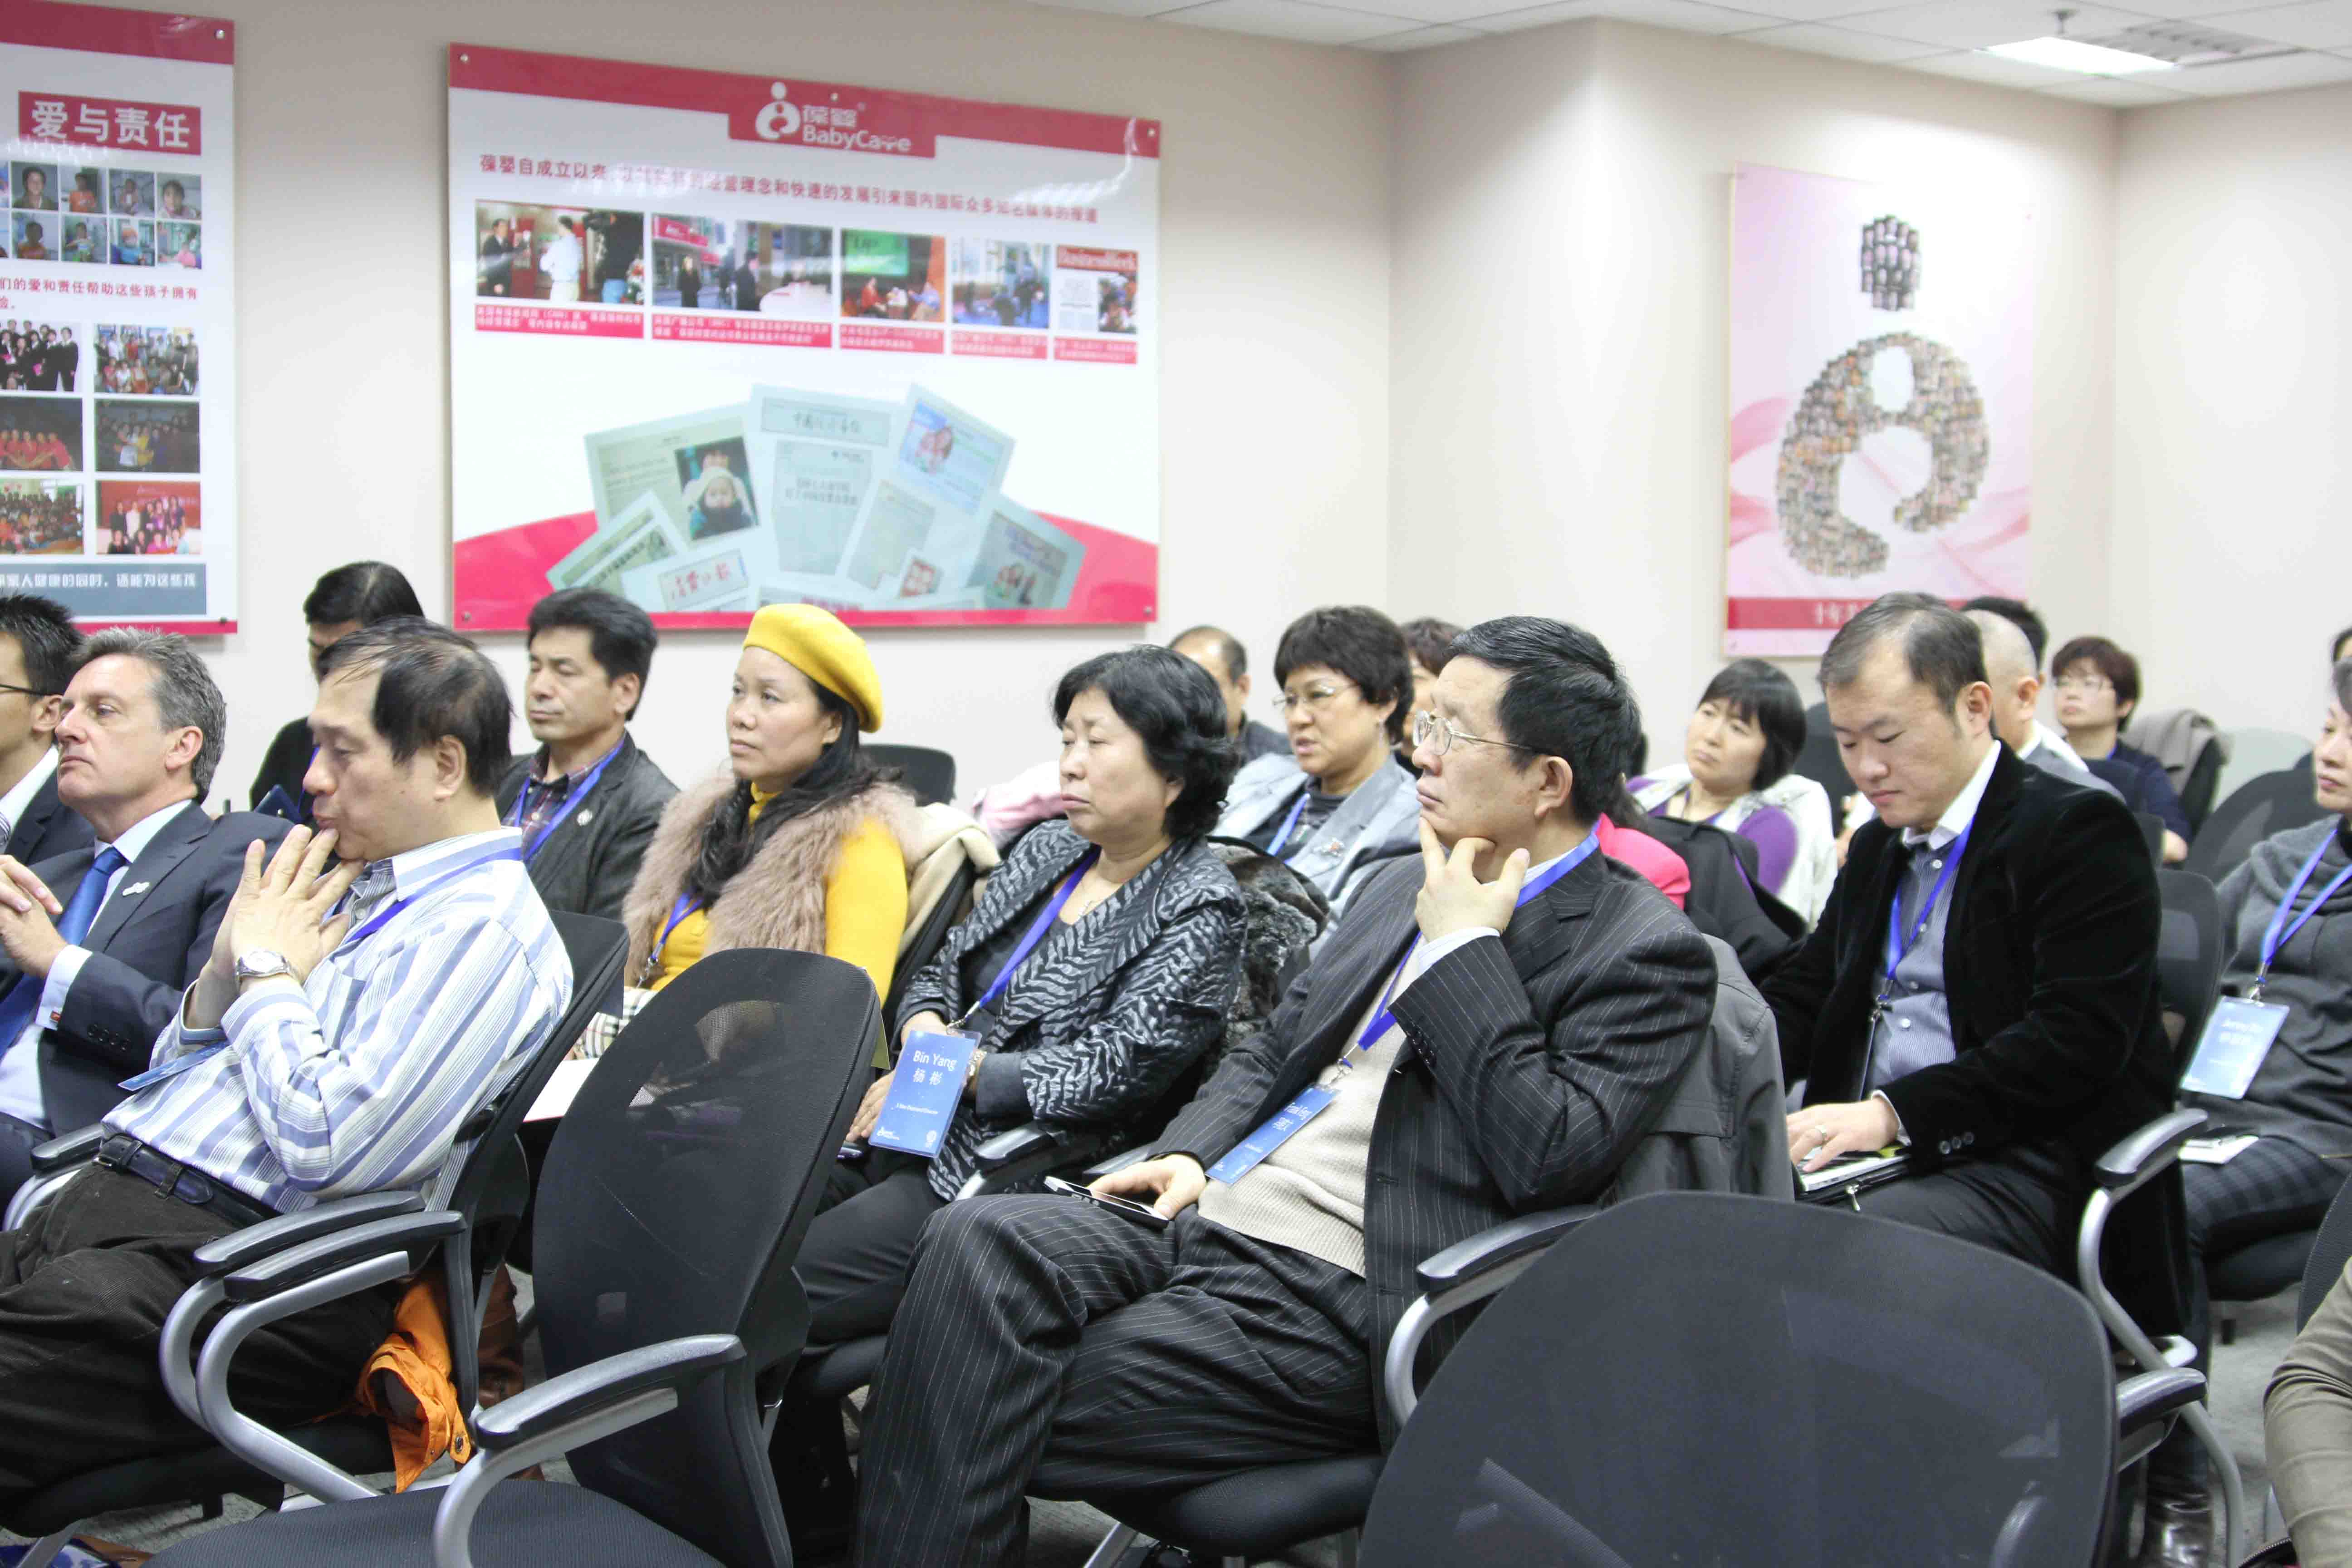 45 USANA Chinese leaders from Australia, Canada, New Zealand and the United States flew into Beijing for a two-day tour of BabyCare’s branch offices and manufacturing facilities.